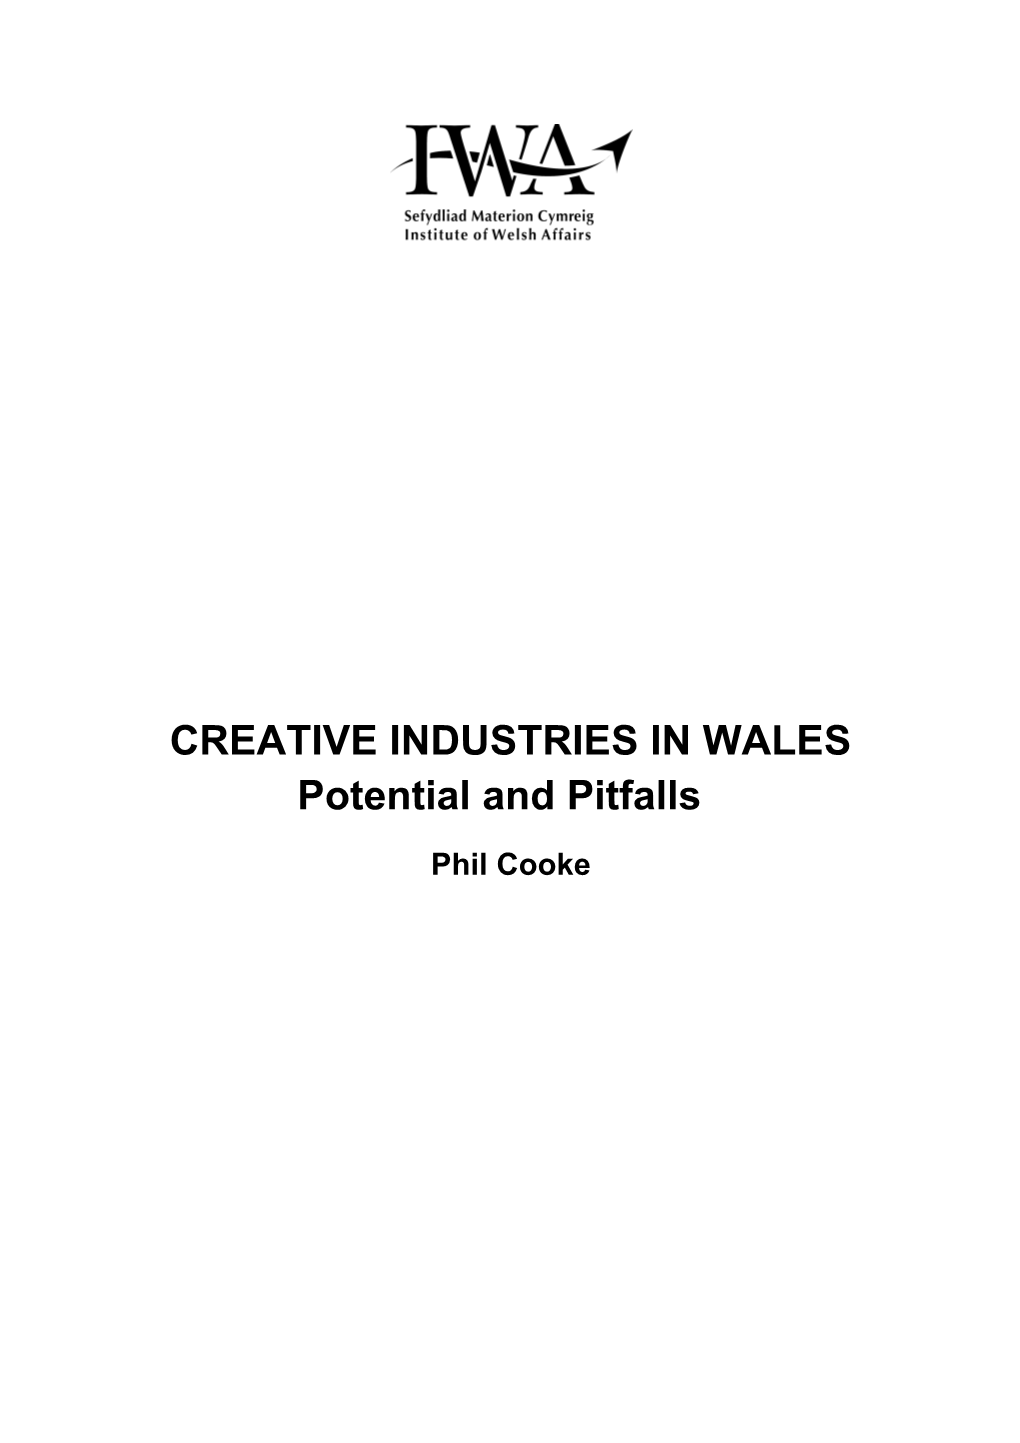 CREATIVE INDUSTRIES in WALES Potential and Pitfalls